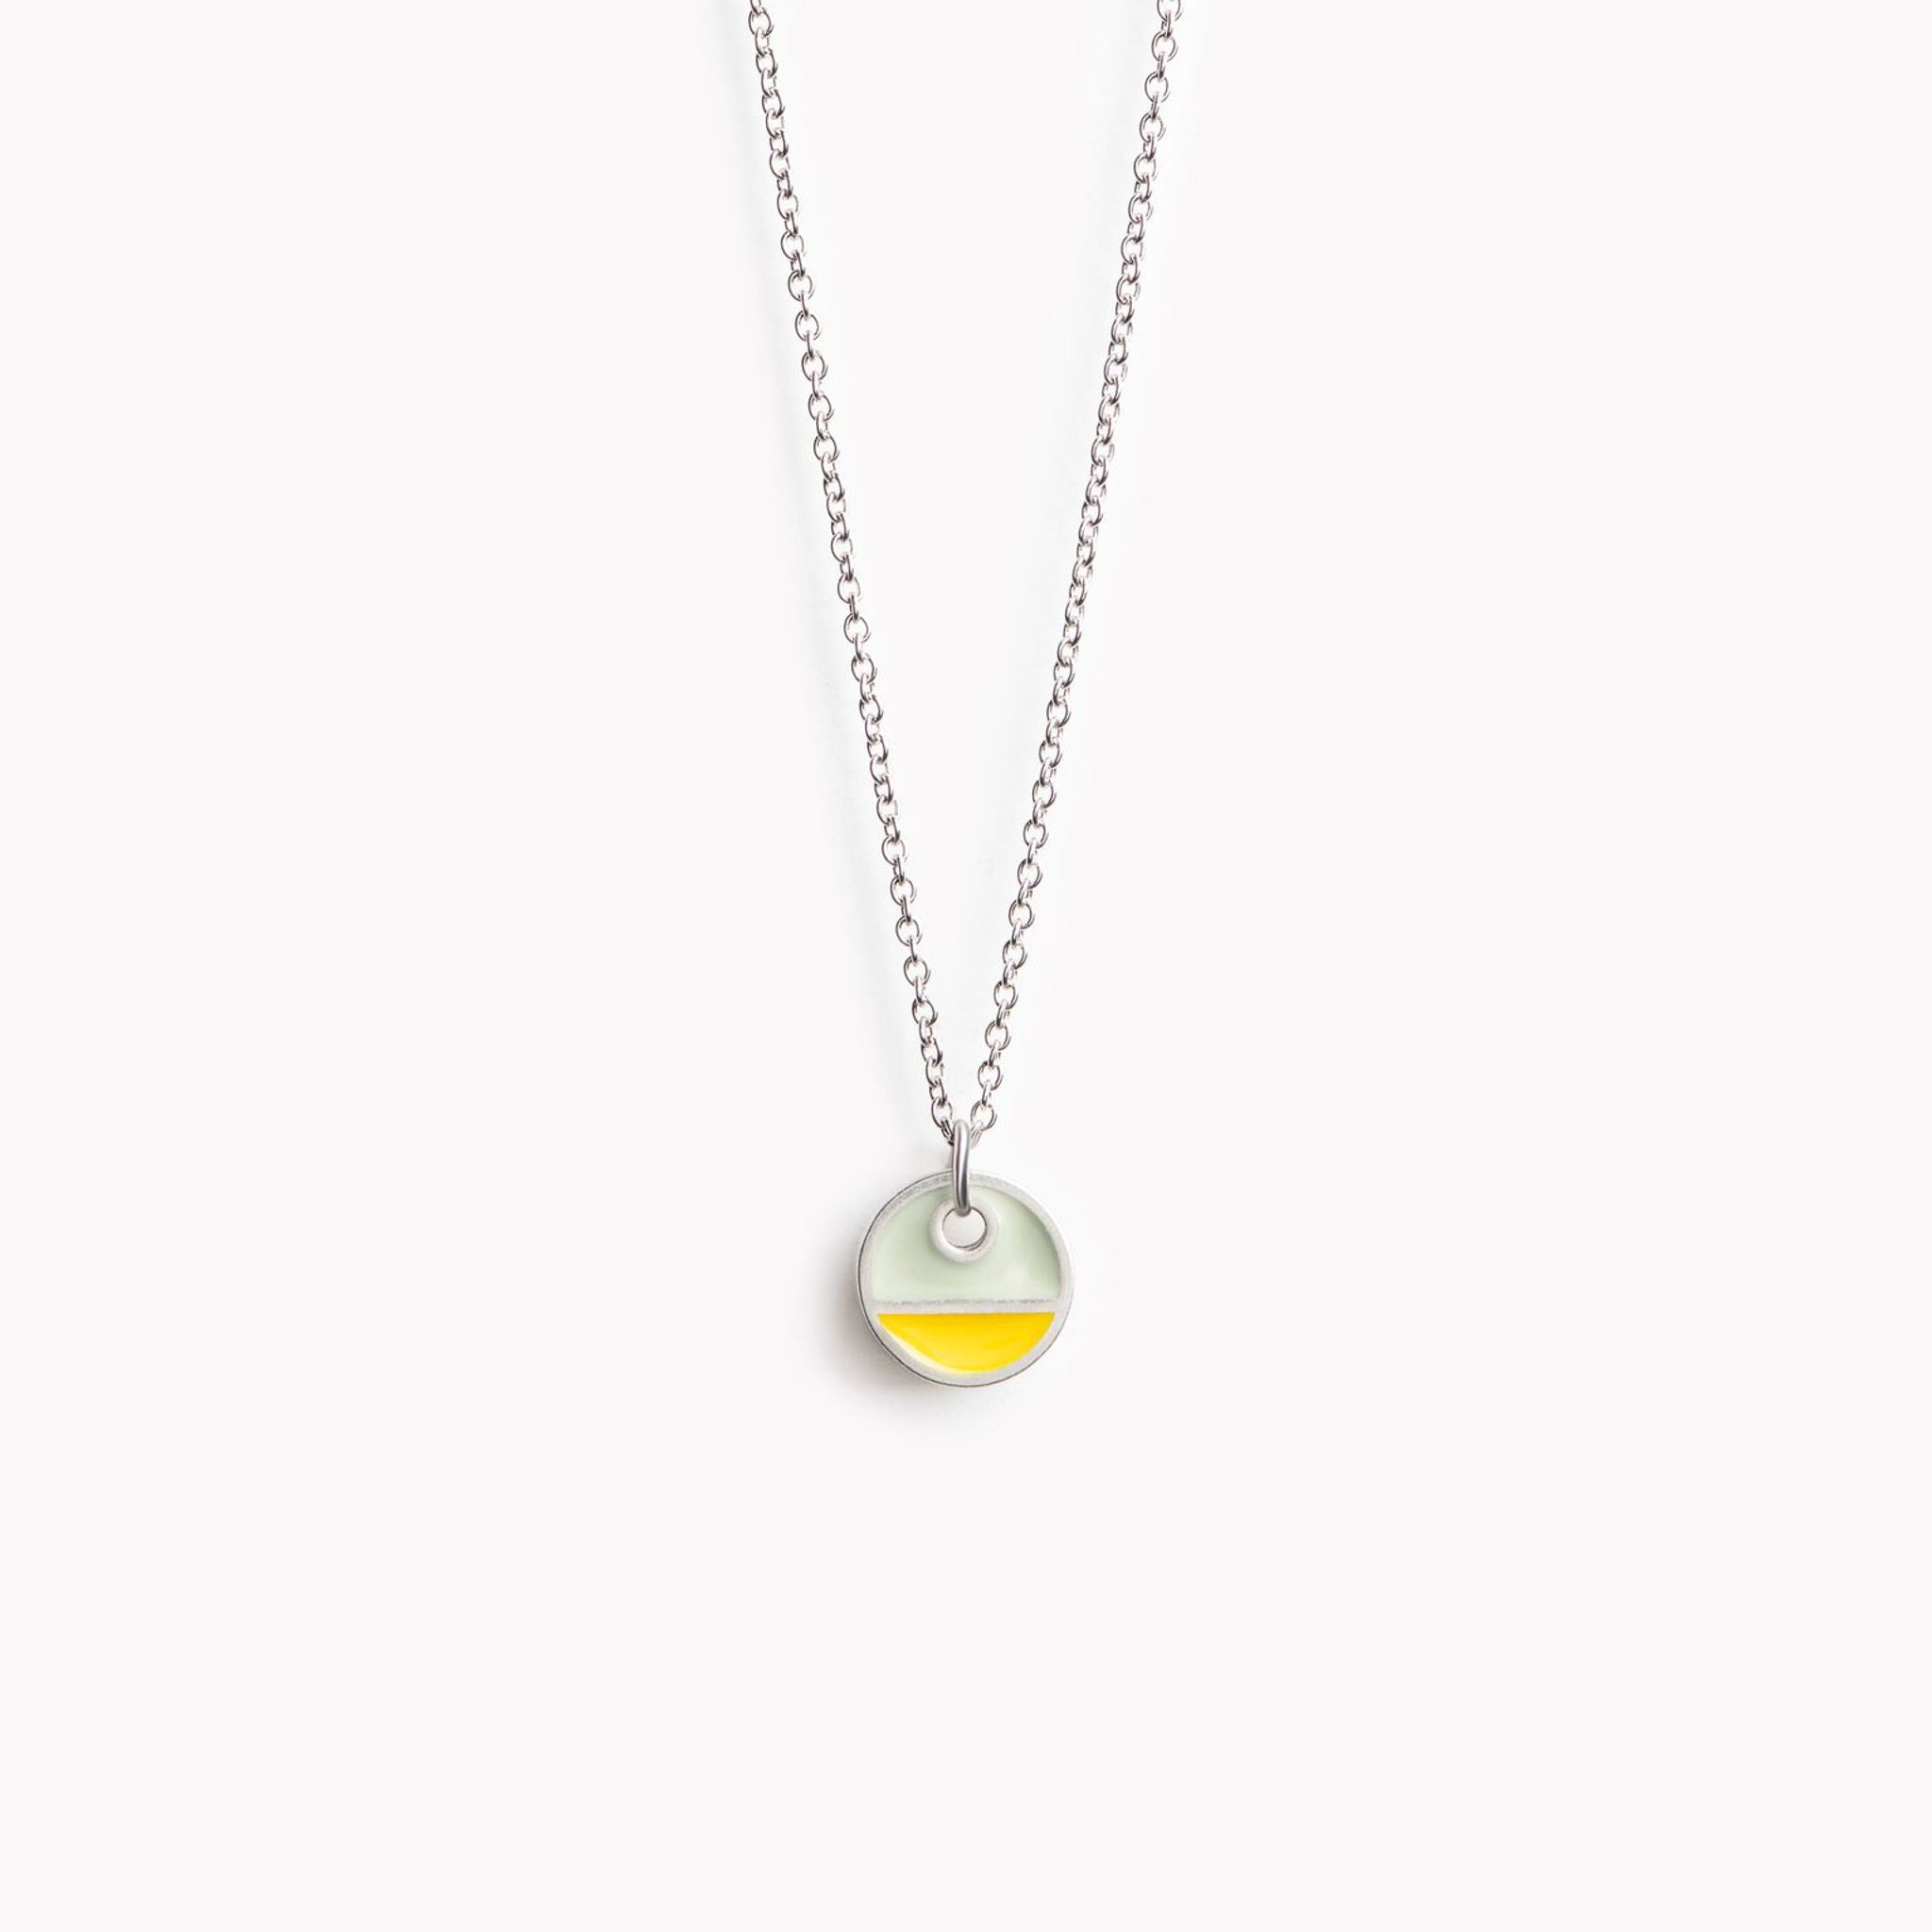 A simple circular pendant necklace with a horizontal division. In yellow and grey.